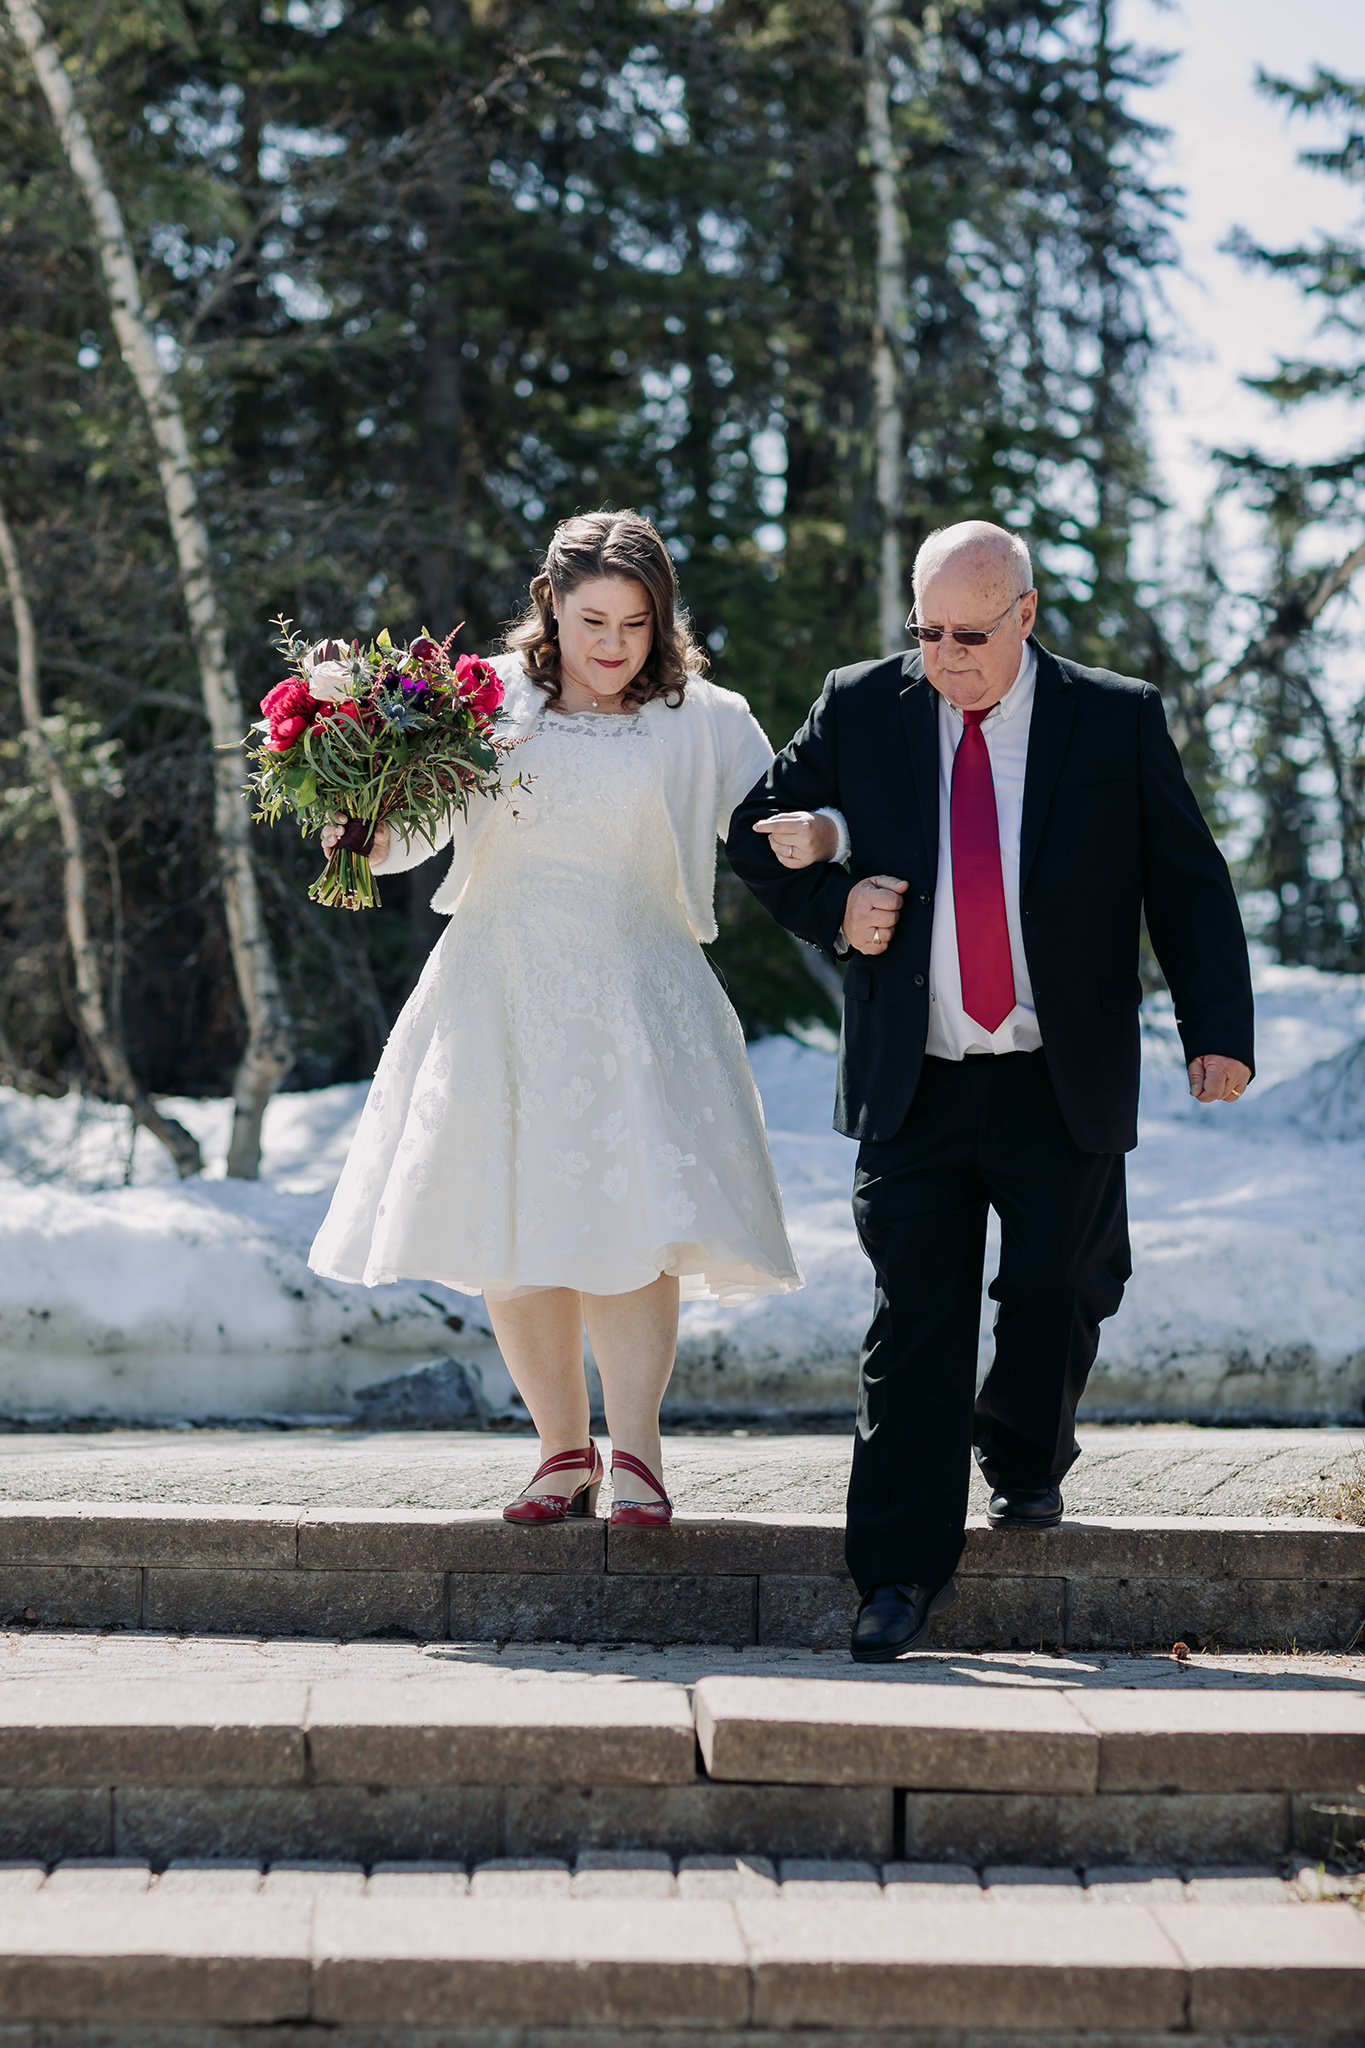 Spring mountain wedding ceremony at the snowy outdoor Viewpoint overlooking Emerald Lake at Emerald Lake Lodge photographed by local mountain intimate wedding & elopement Photographer ENV Photography